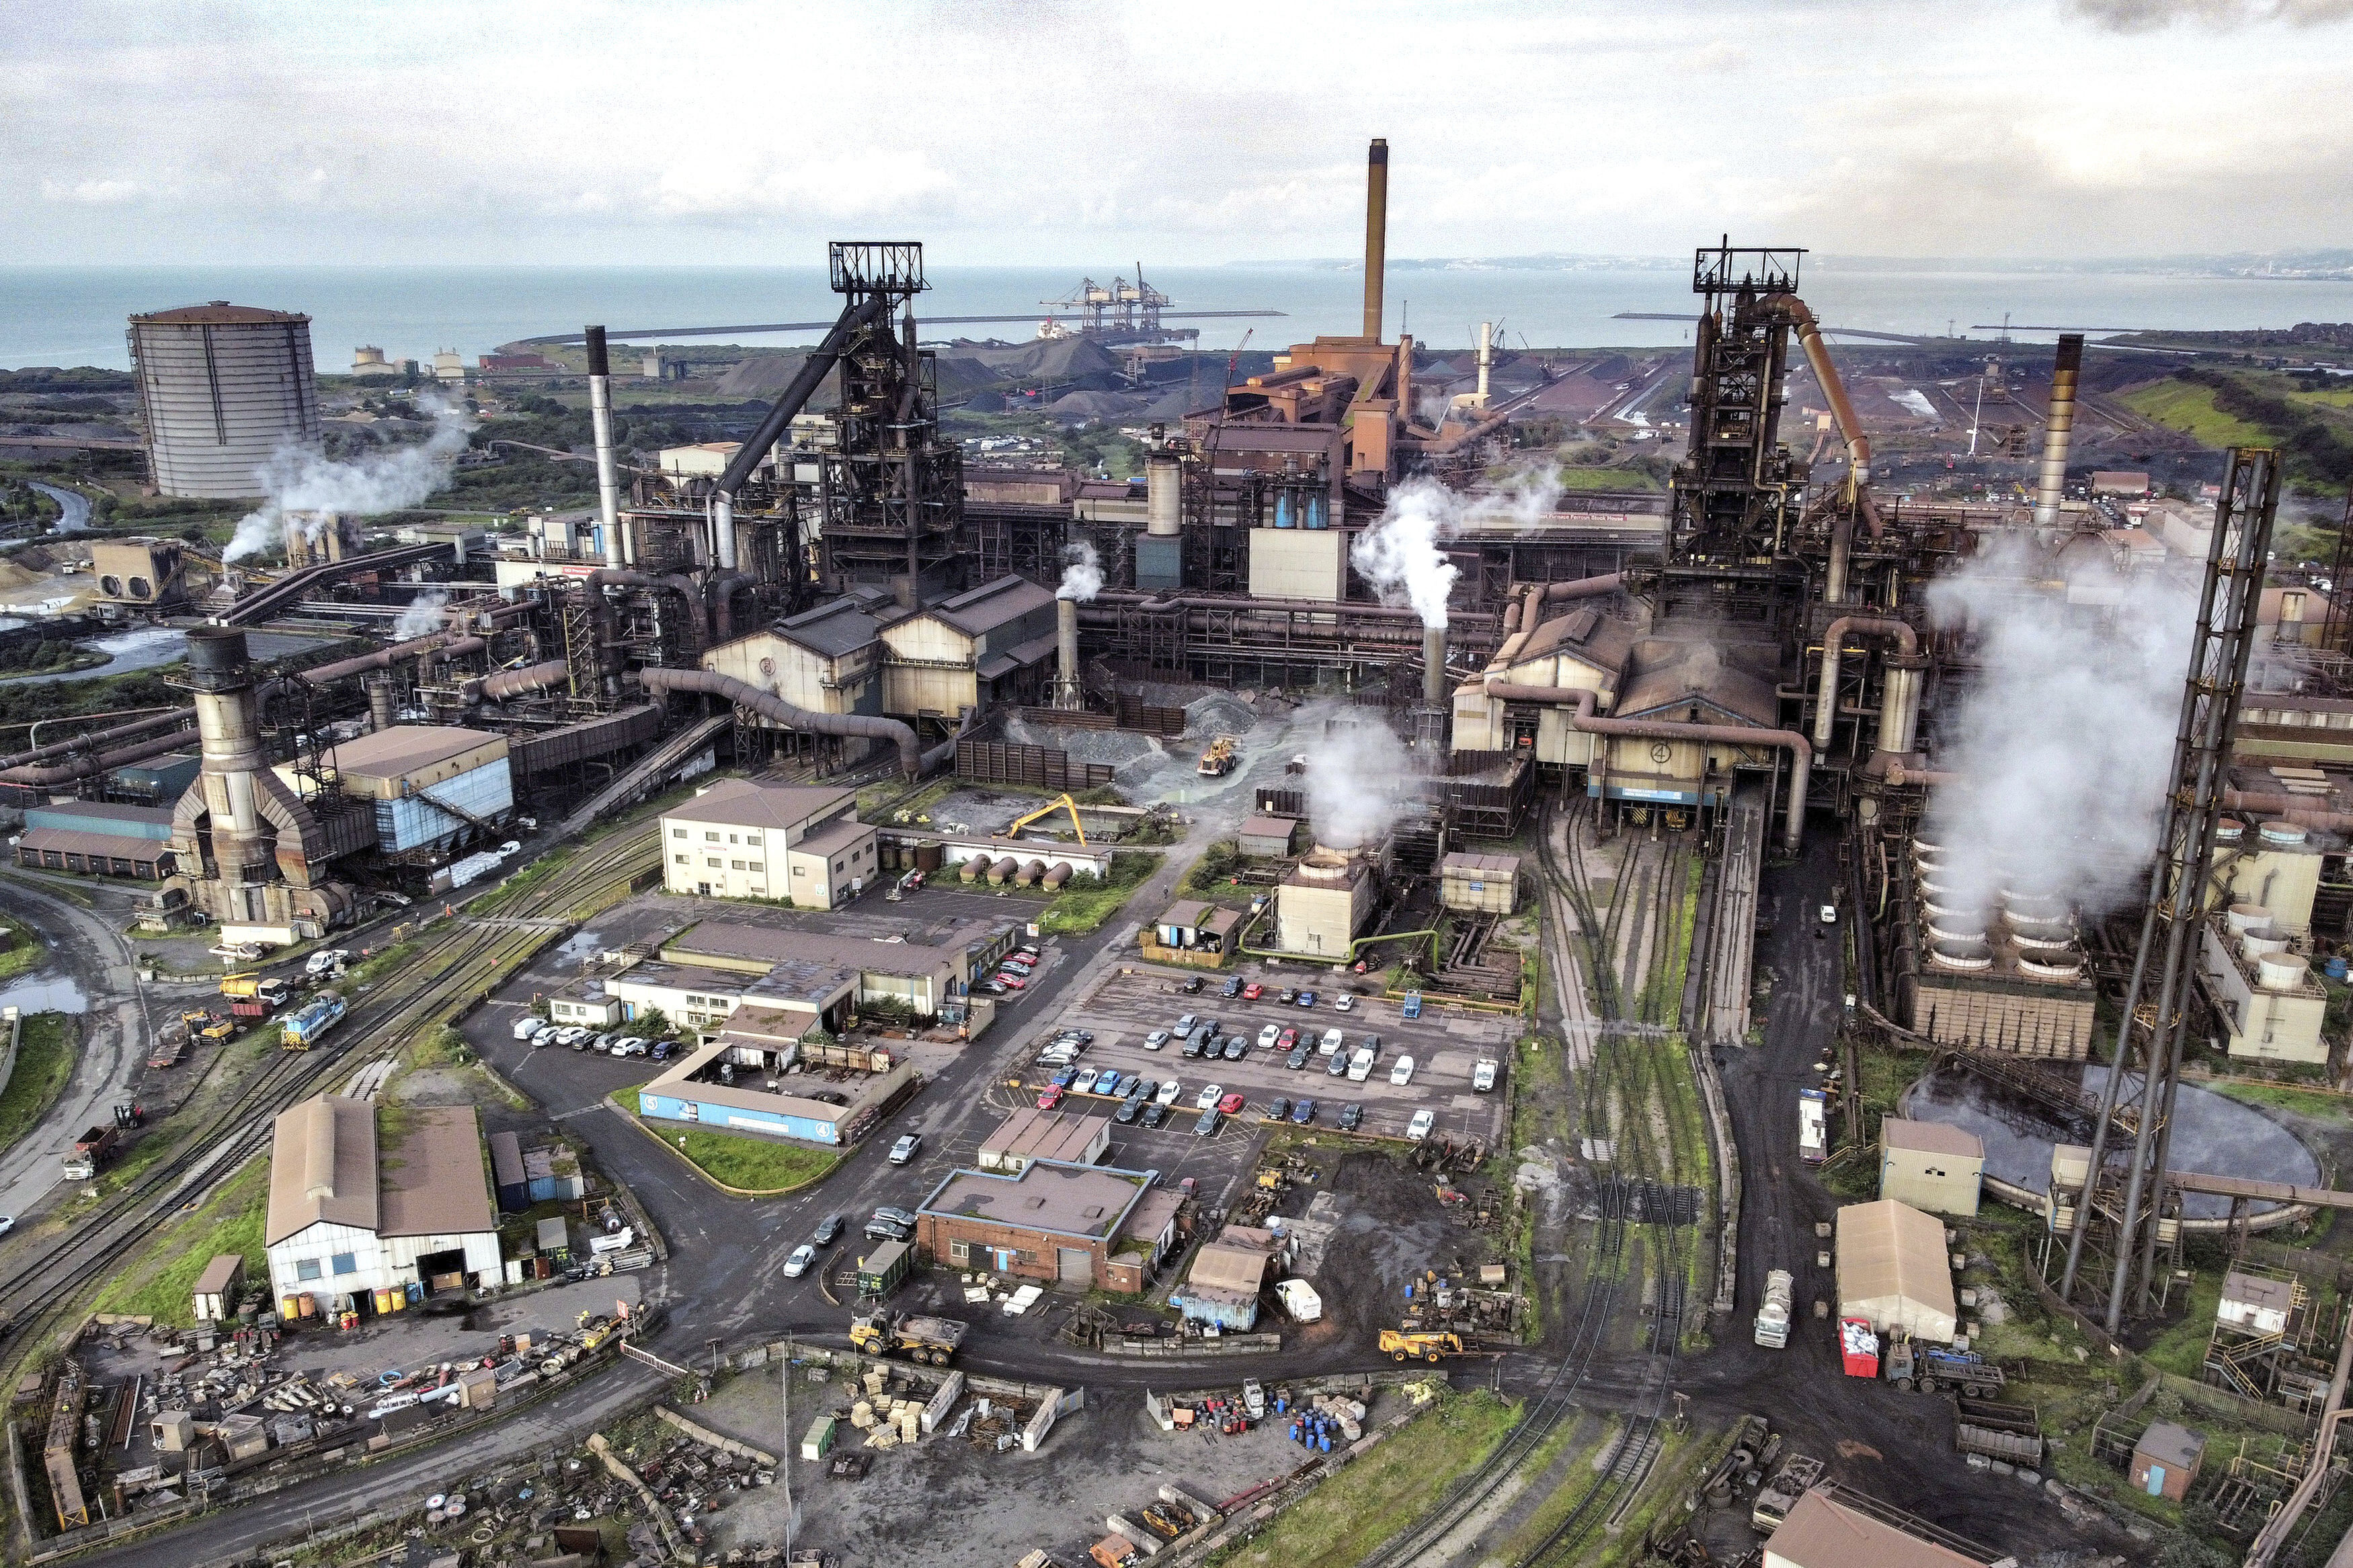 India's Tata Steel CEO expects European operations to improve from